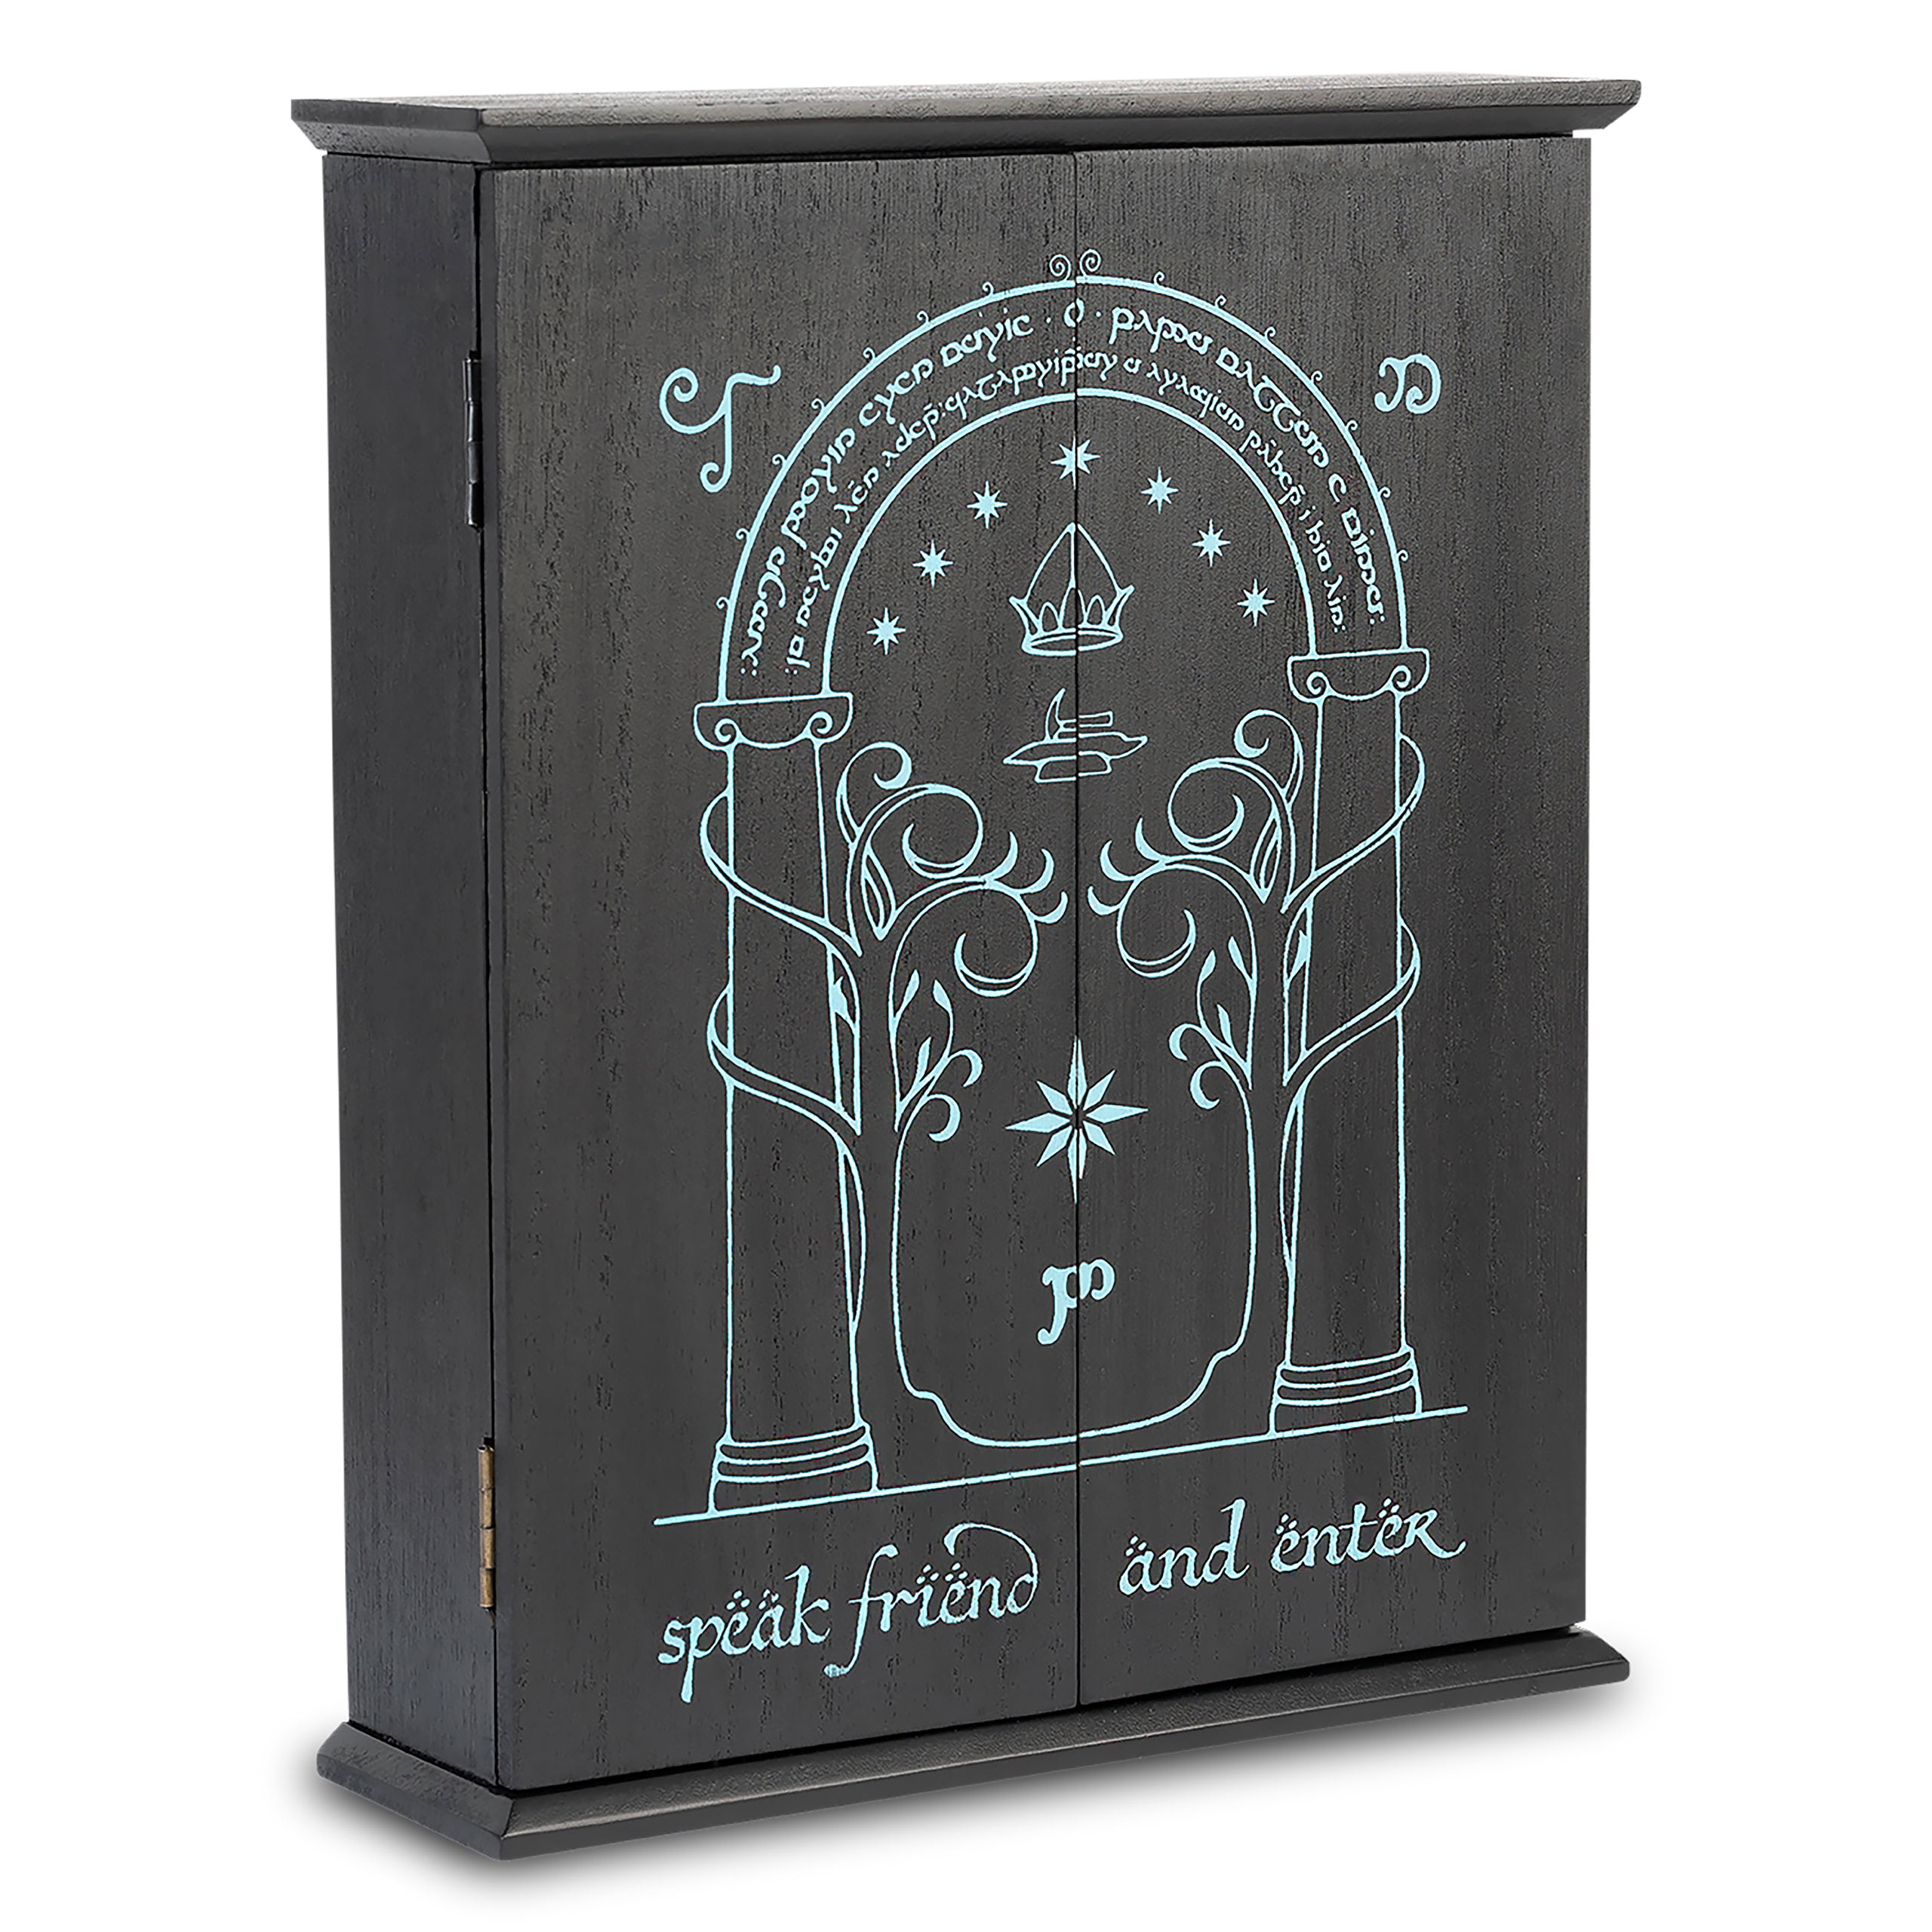 Lord of the Rings - The Doors of Durin Key Box with Glow in the Dark Effect